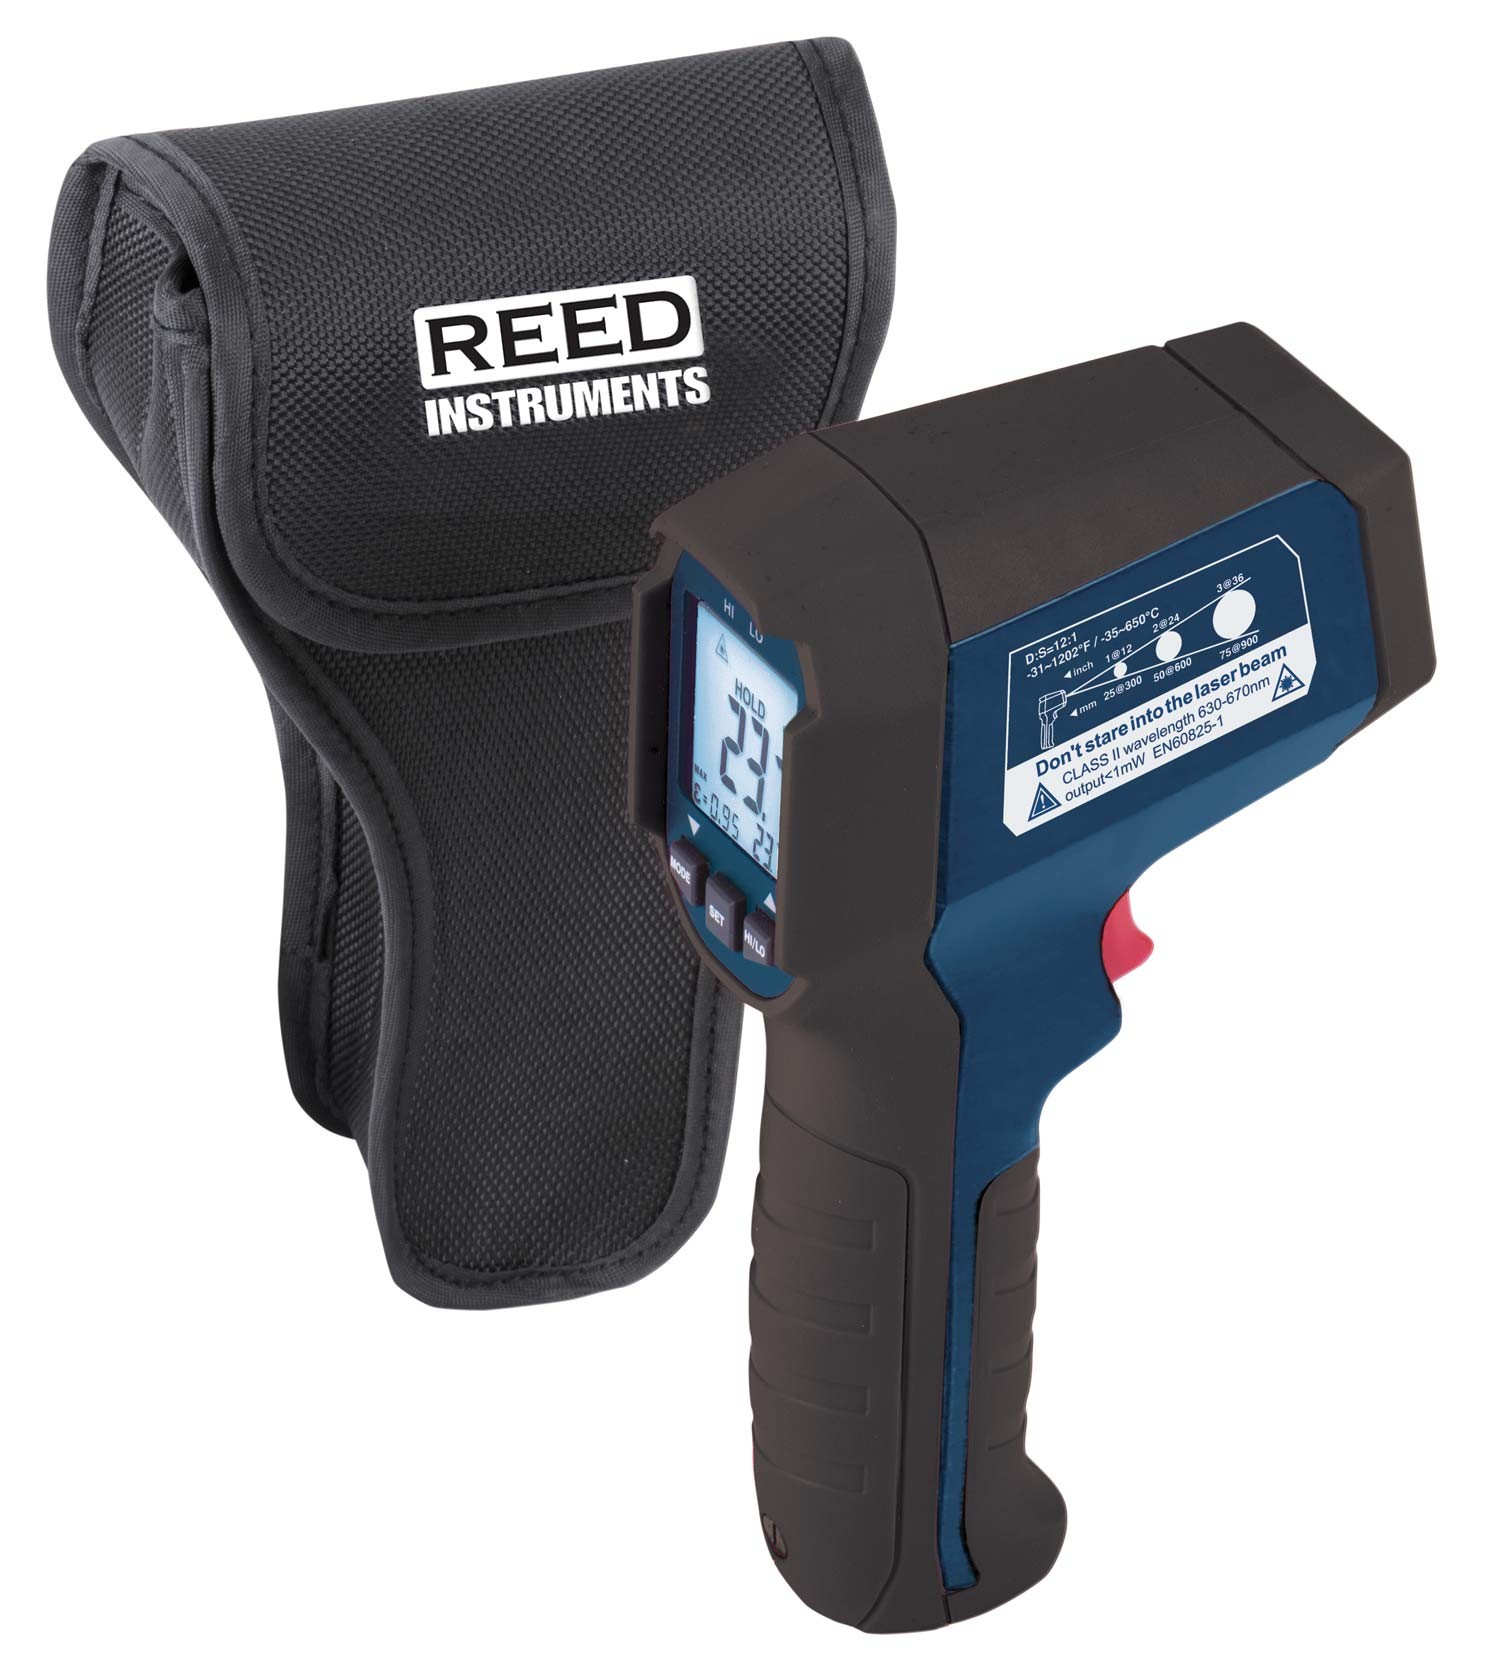 Reed R2310 Infrared Thermometer Included